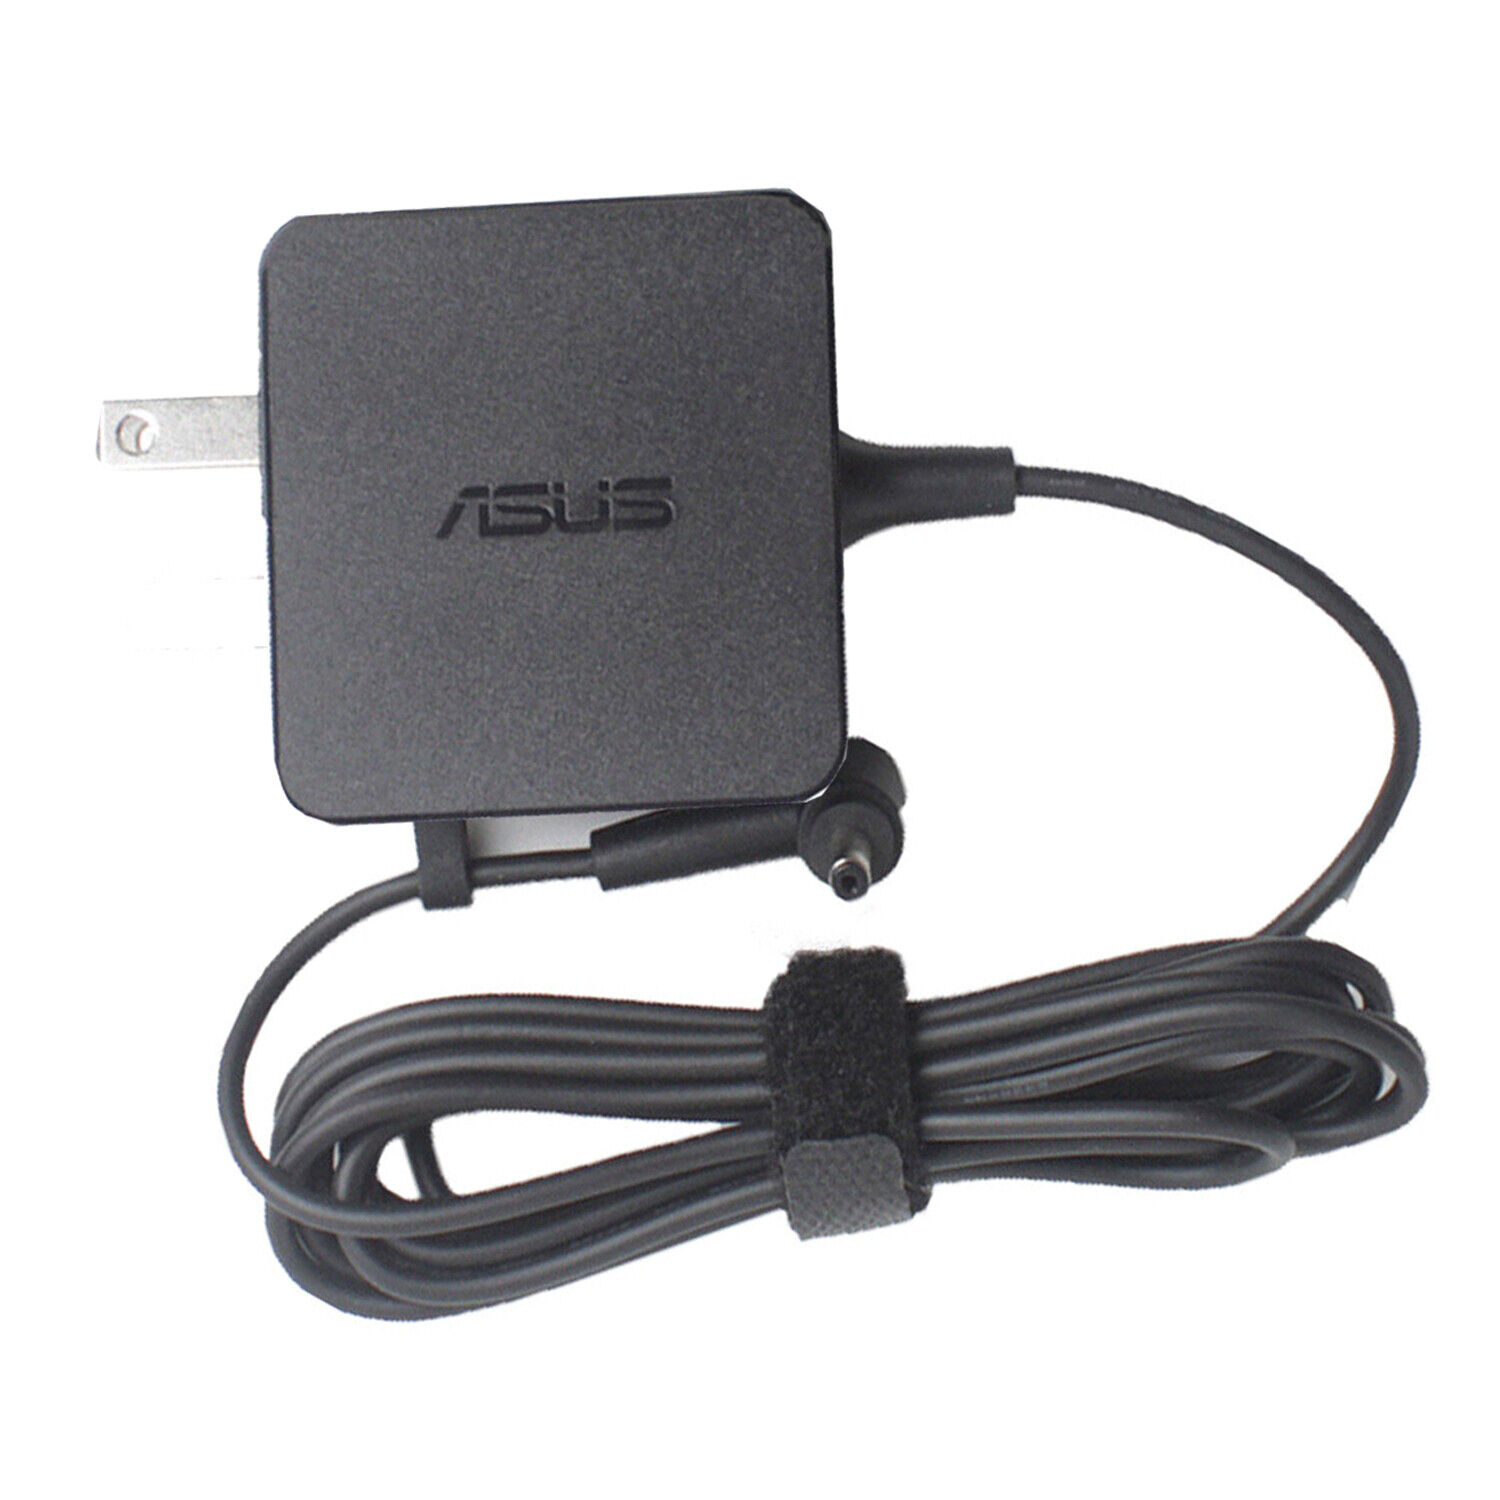 New 33W 4.0X1.35 For Asus R541NA AC Laptop Charger Adapter Charger Power Supply